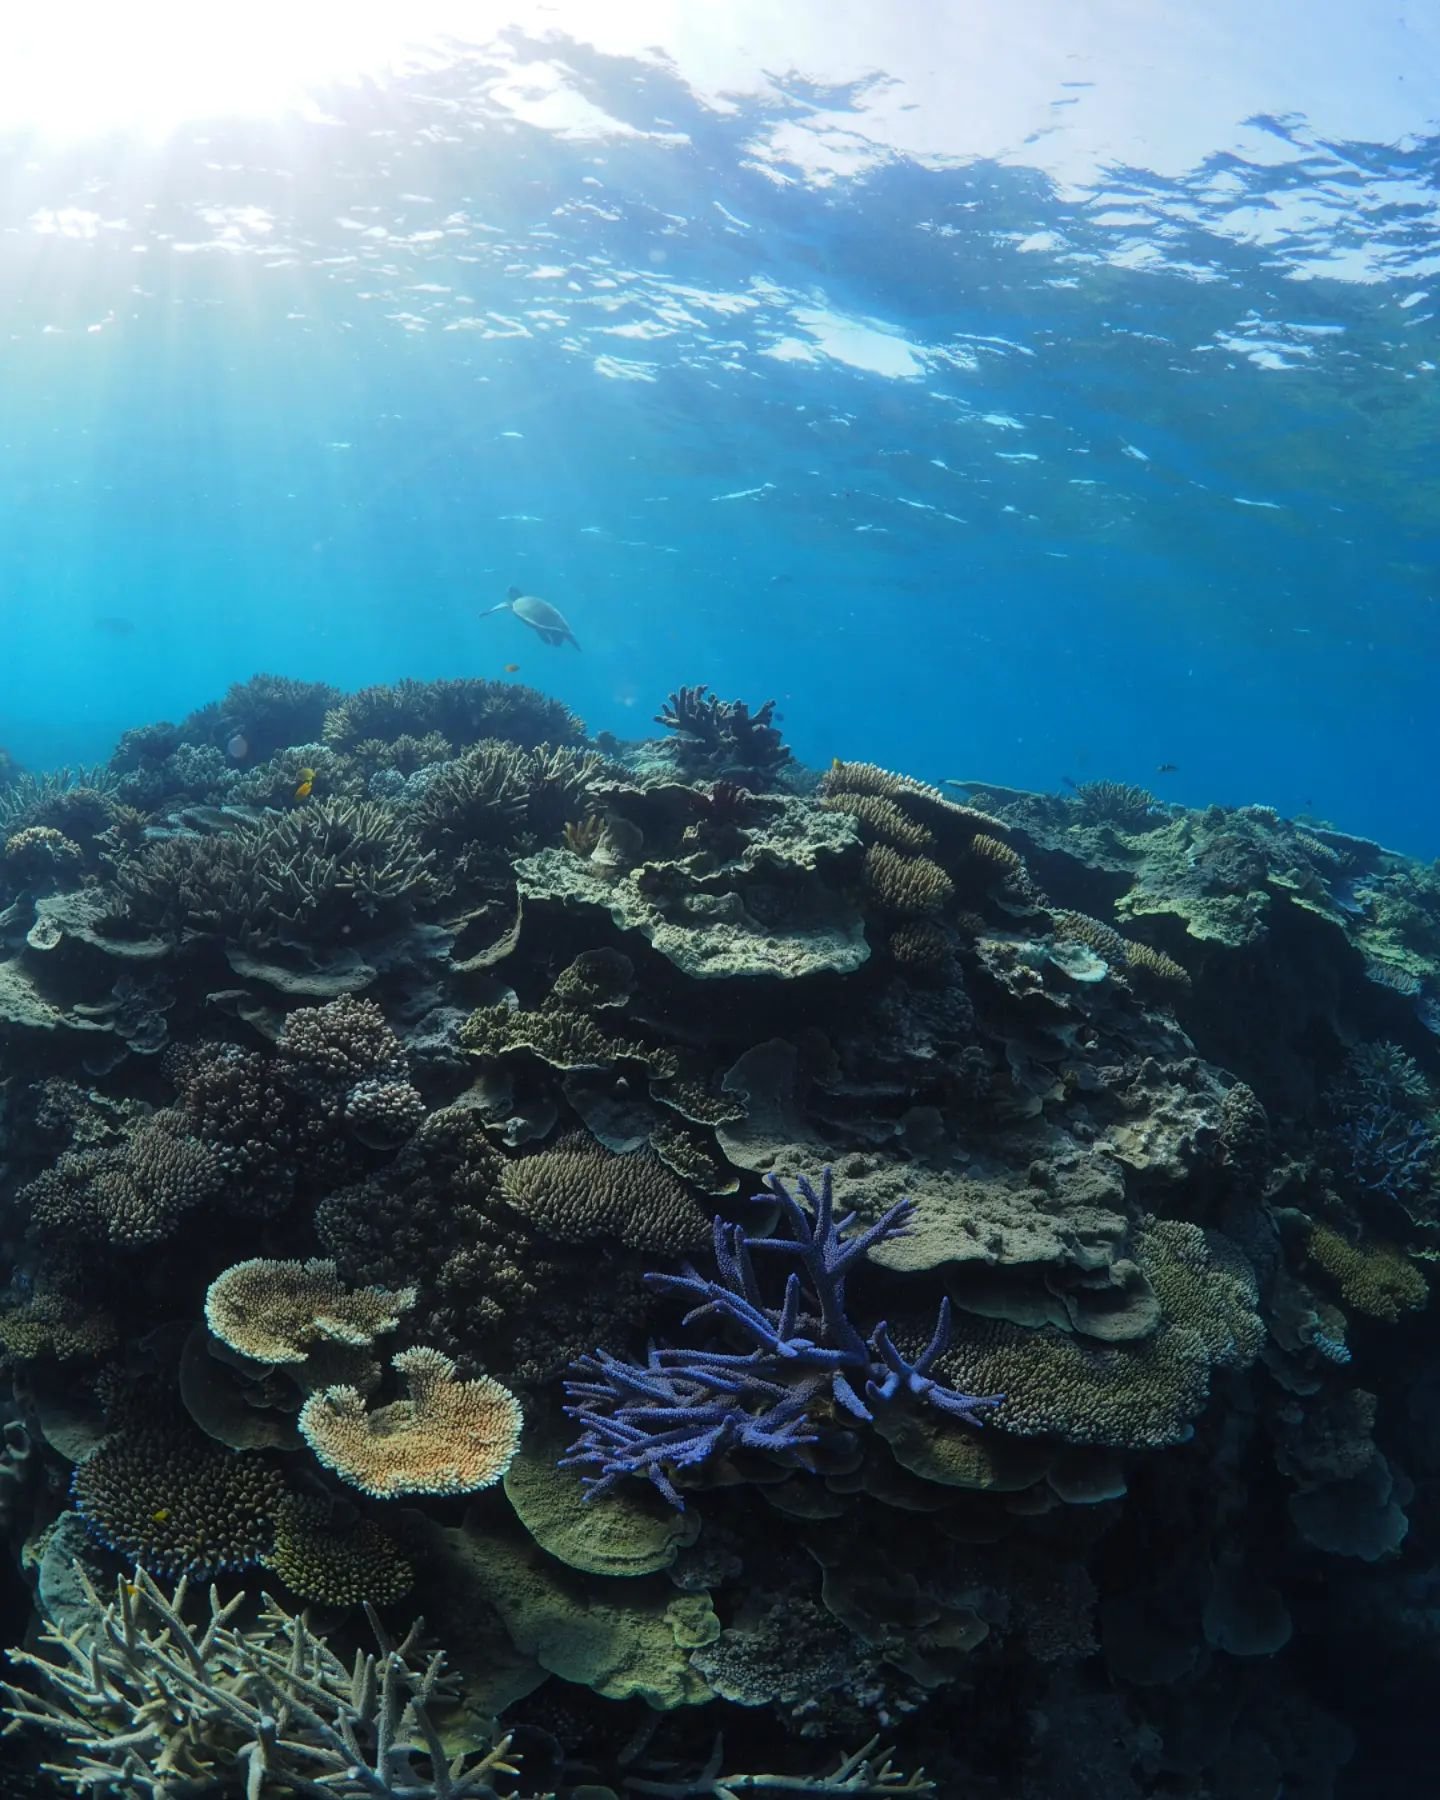 Exploring Moore Reef before the coral spawning a couple of weeks ago at the @sunloverreefcruises pontoon. So great to see the high cover and diversity of corals here.